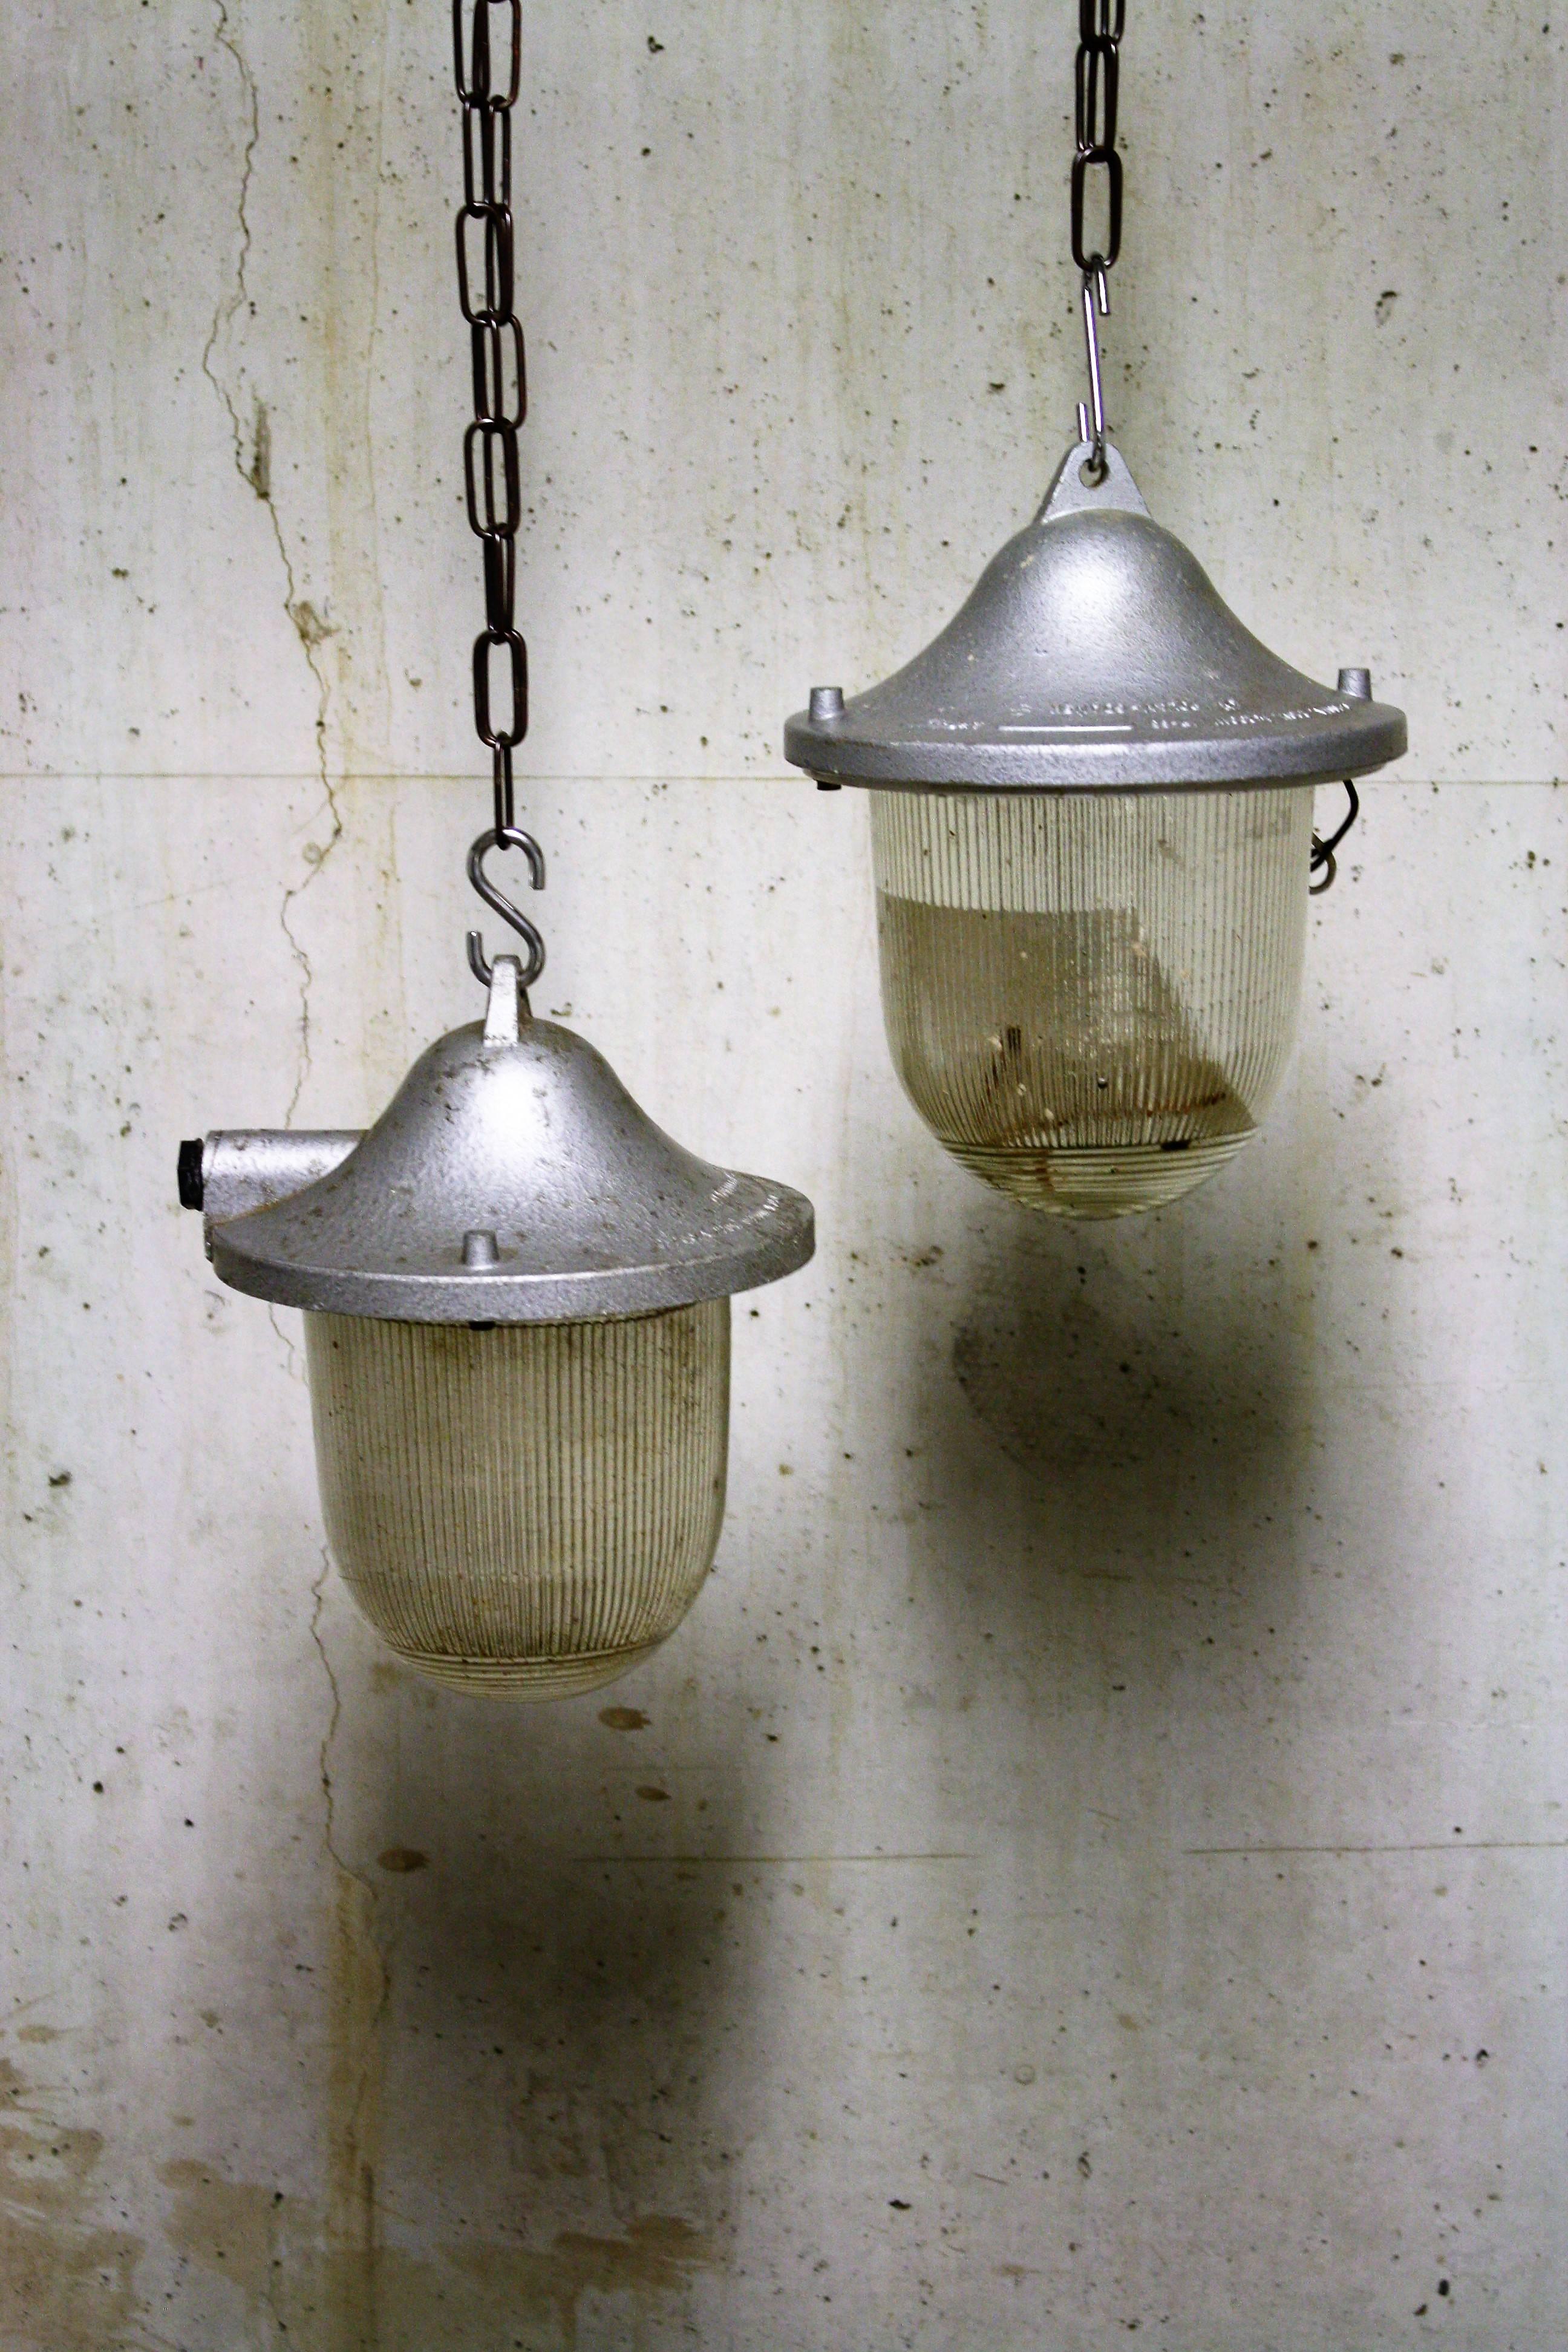 Vintage Industrial pendant lights made from cast iron and explosion proof prismatic glass.
?
These lamps are referred to as bully lamps or bunker lamps. 

They where commonly used in chemical fatcories, mines,.

These salvaged lamps have a